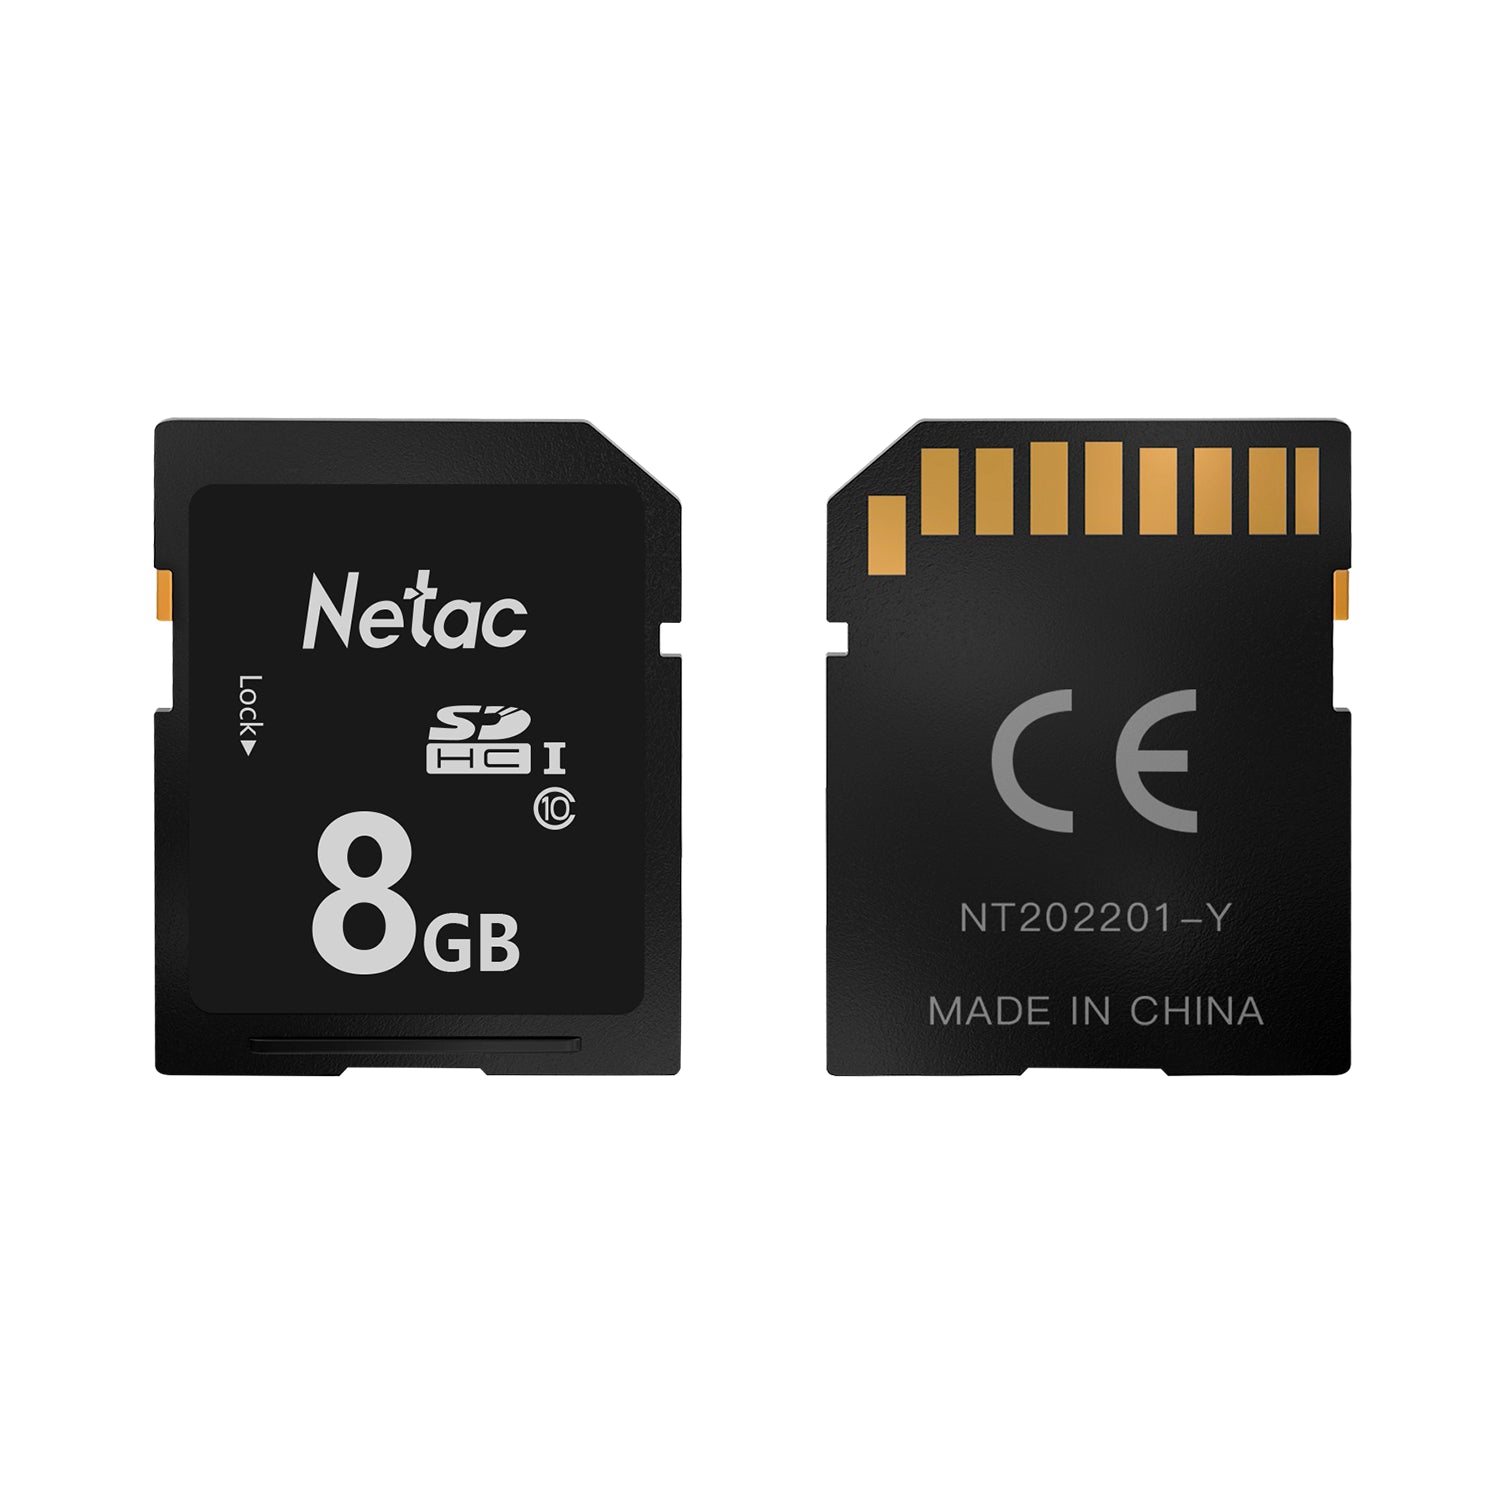 8 GB Full Size SD Card (Now in Stock!)